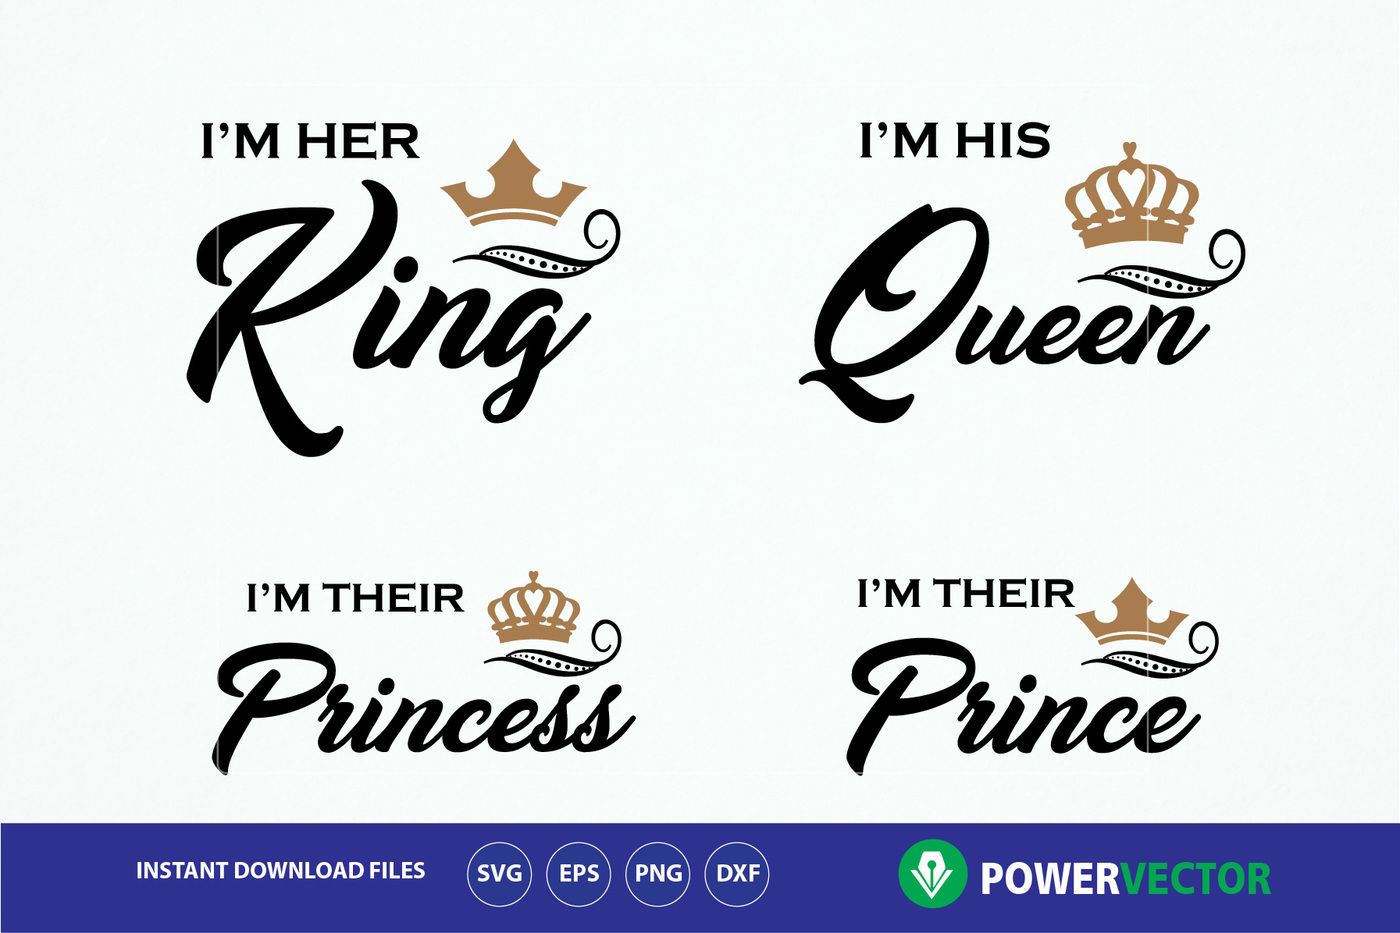 King Queen Princess Prince T shirts. Royal Family Shirt Design By PowerVector